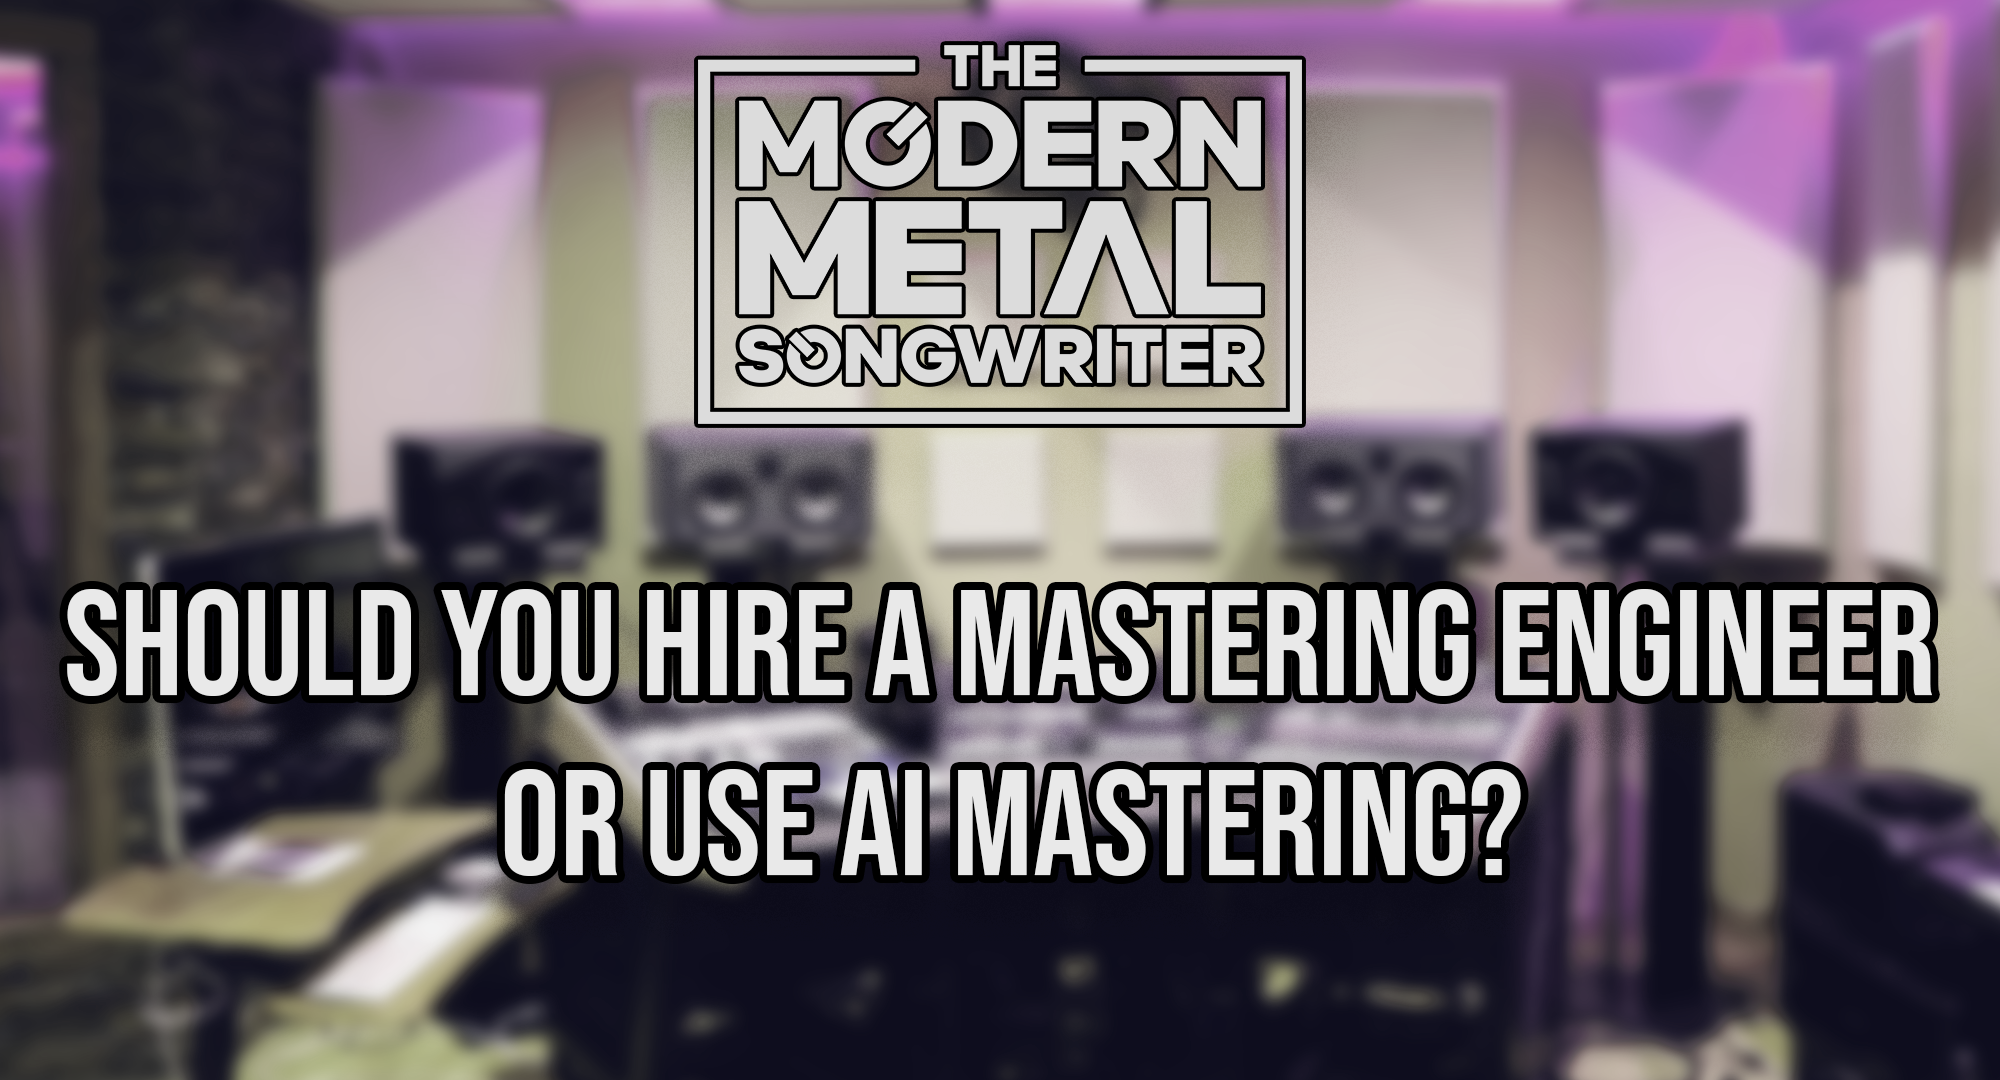 Should You Hire a Mastering Engineer or Use AI Mastering (LANDR, eMastered, etc)? ModernMetalSongwriter graphic